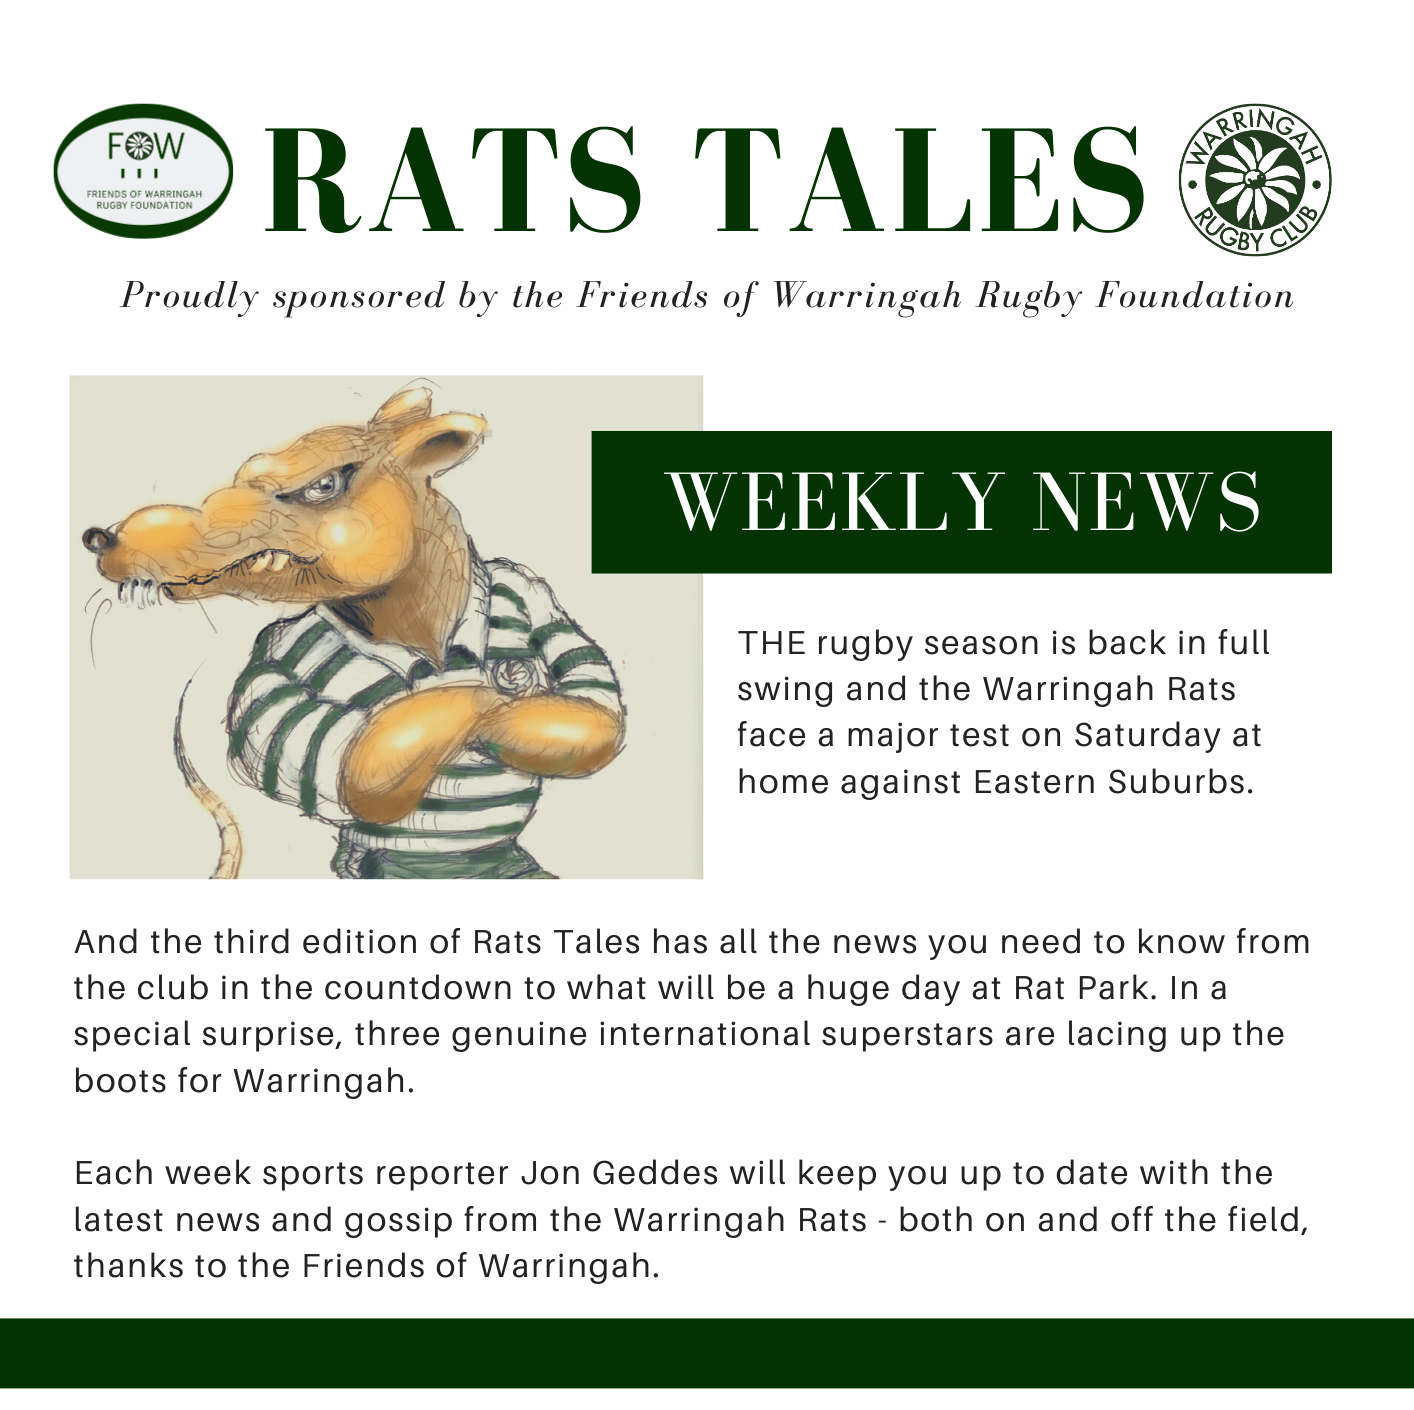 Rats Tales Newsletter - Proudly sponsored by the Friends of Warringah Rugby Foun...